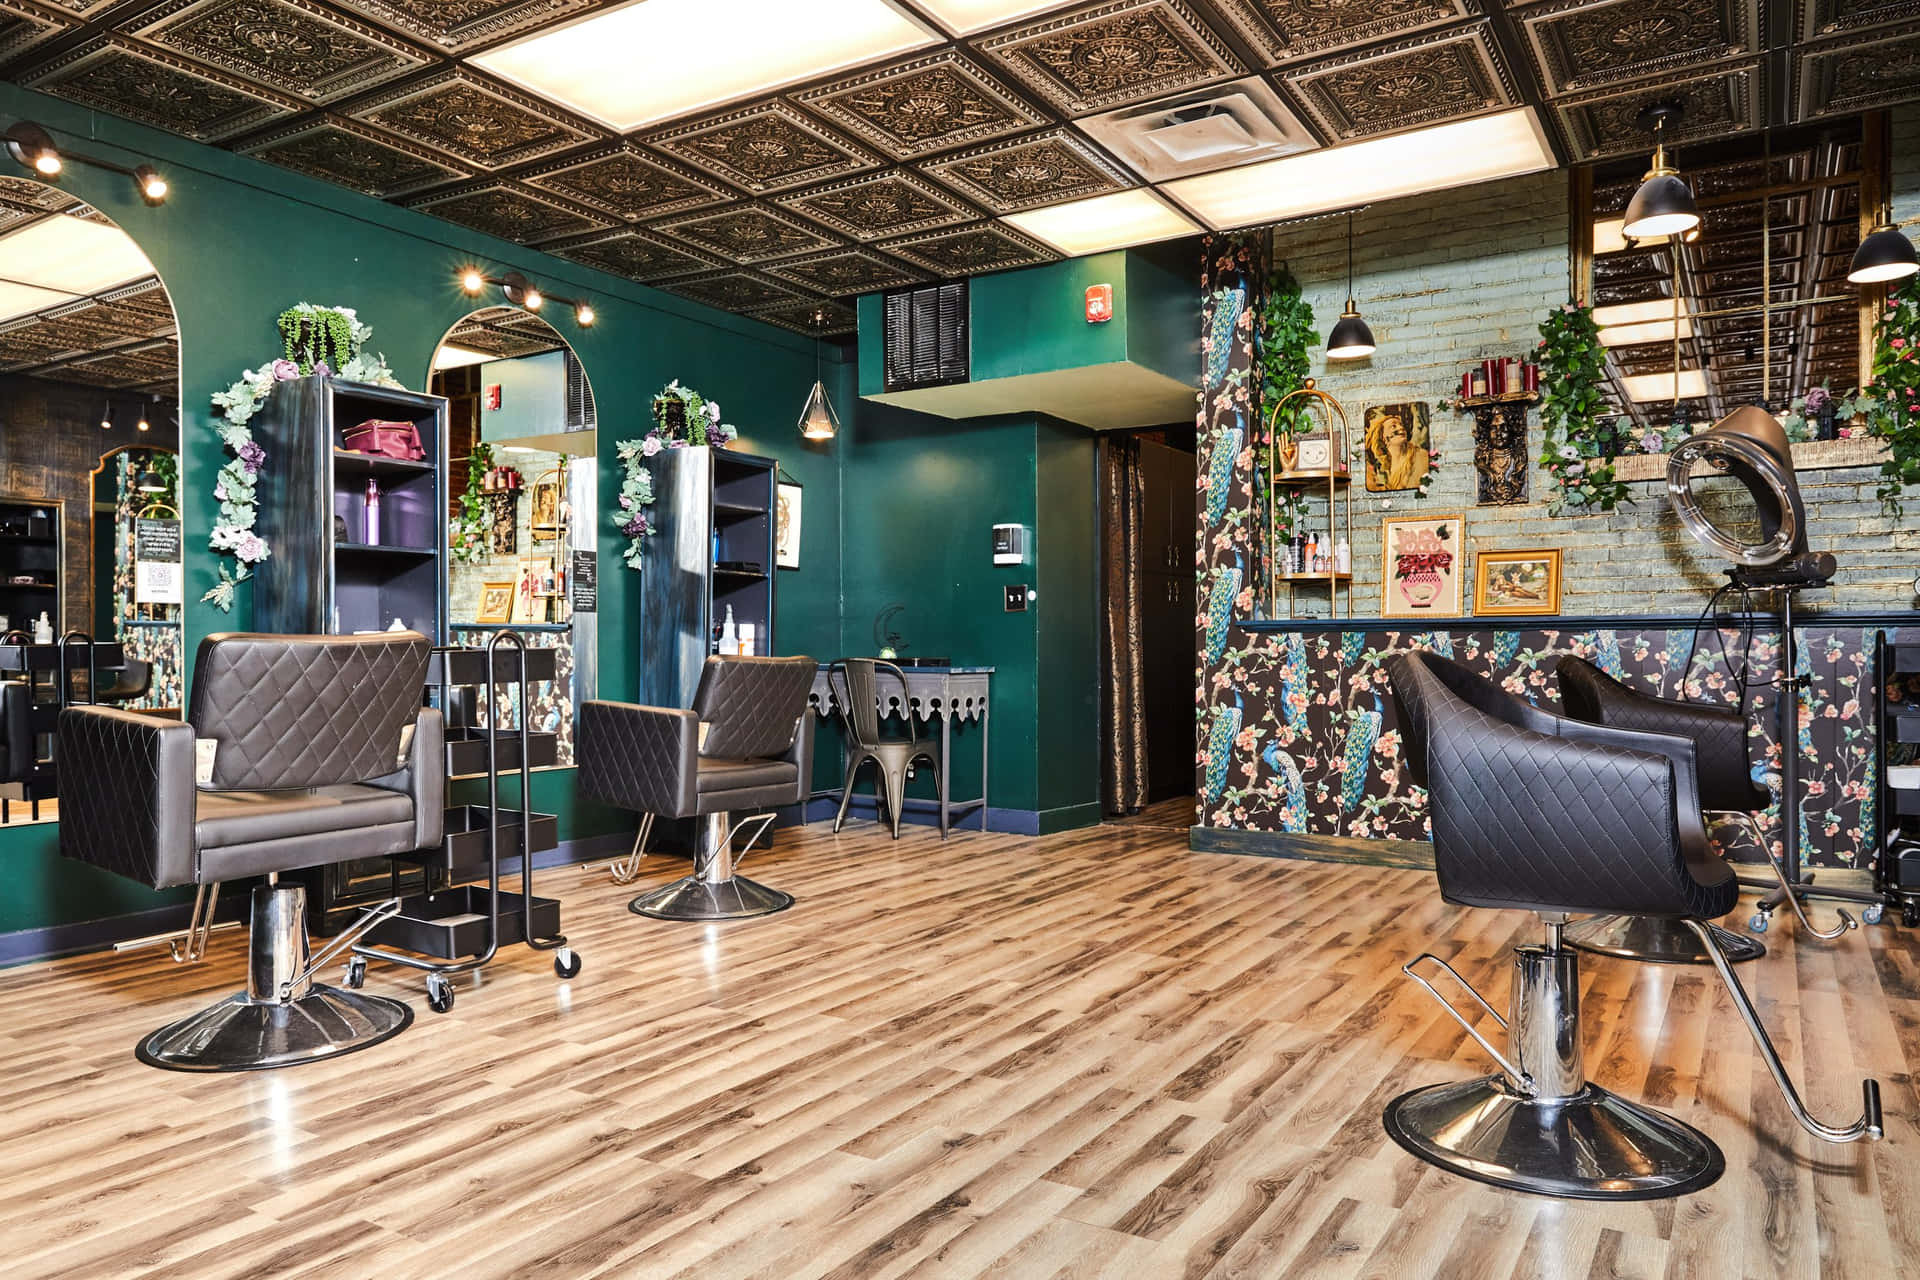 Rejuvenate Your Hair with Expert Styling at Our Hair Salon